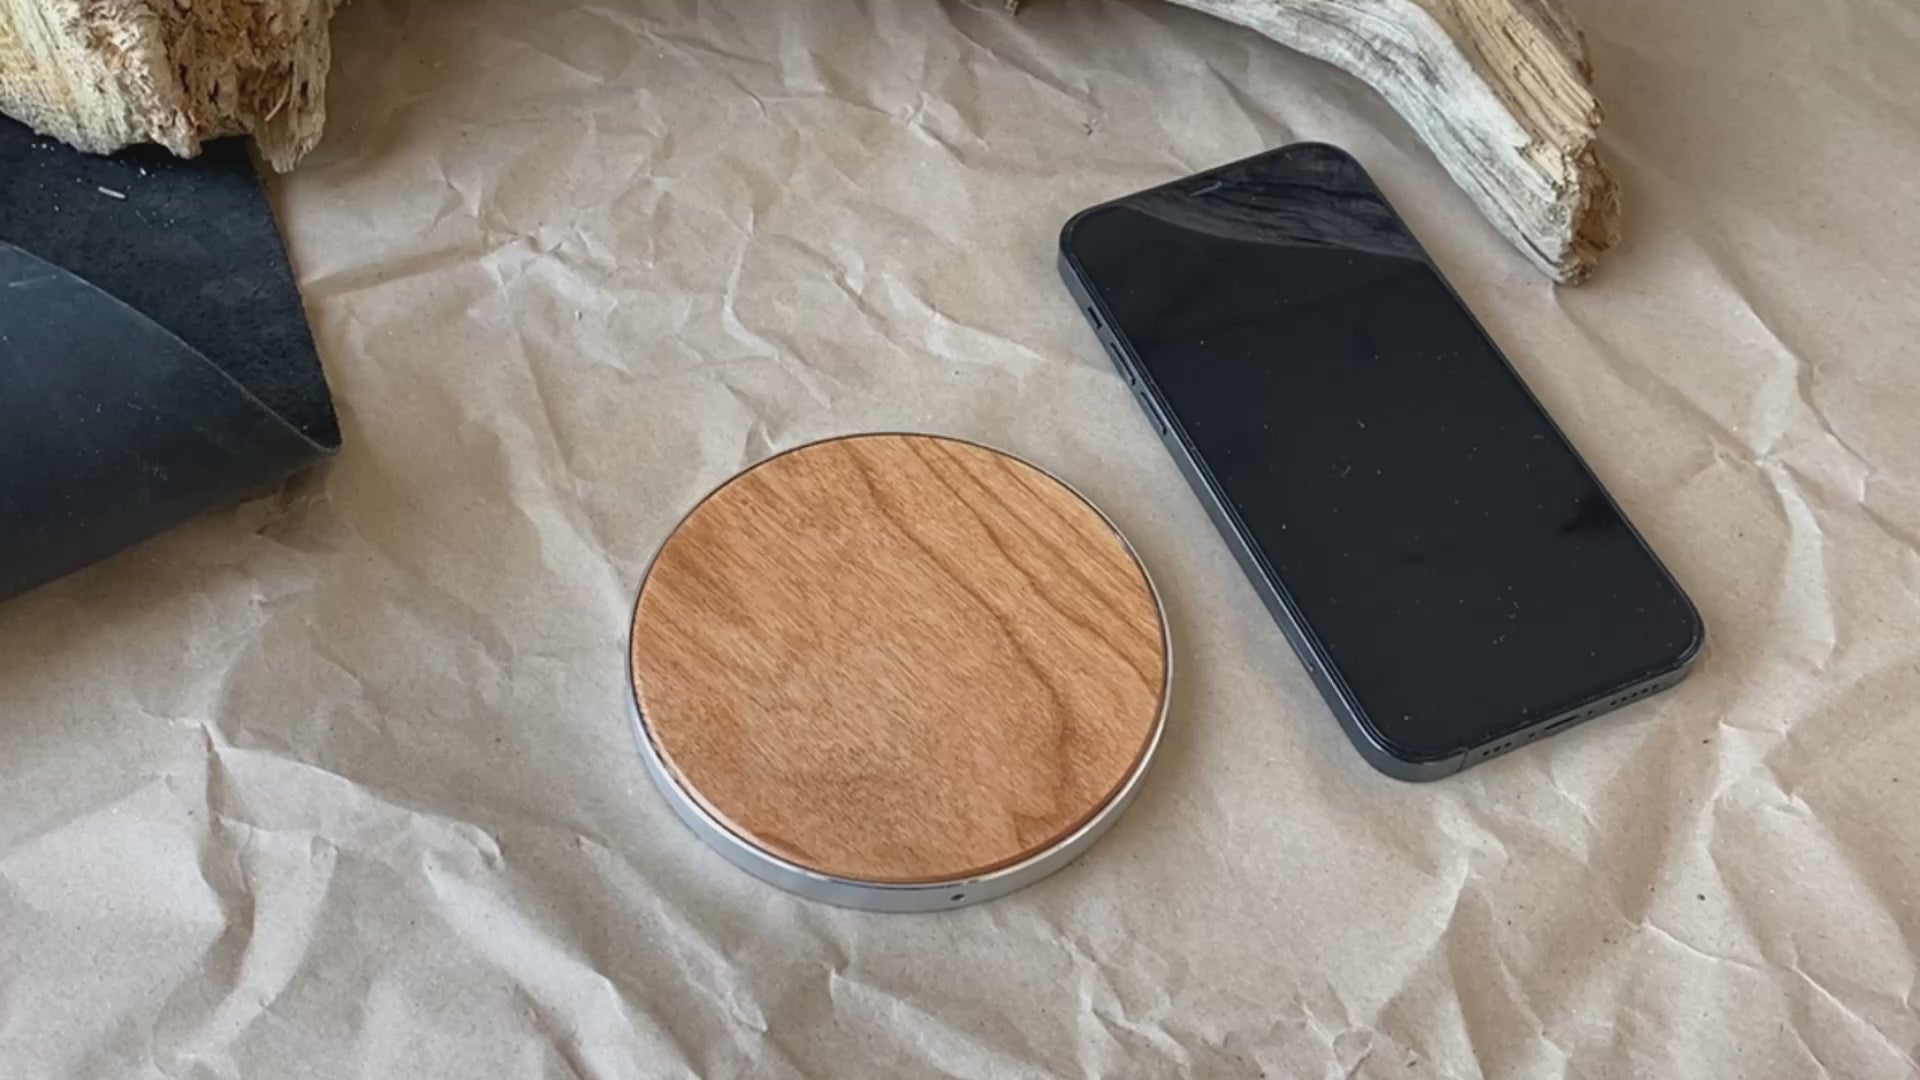 Wireless Fast Charger engraving Tiger